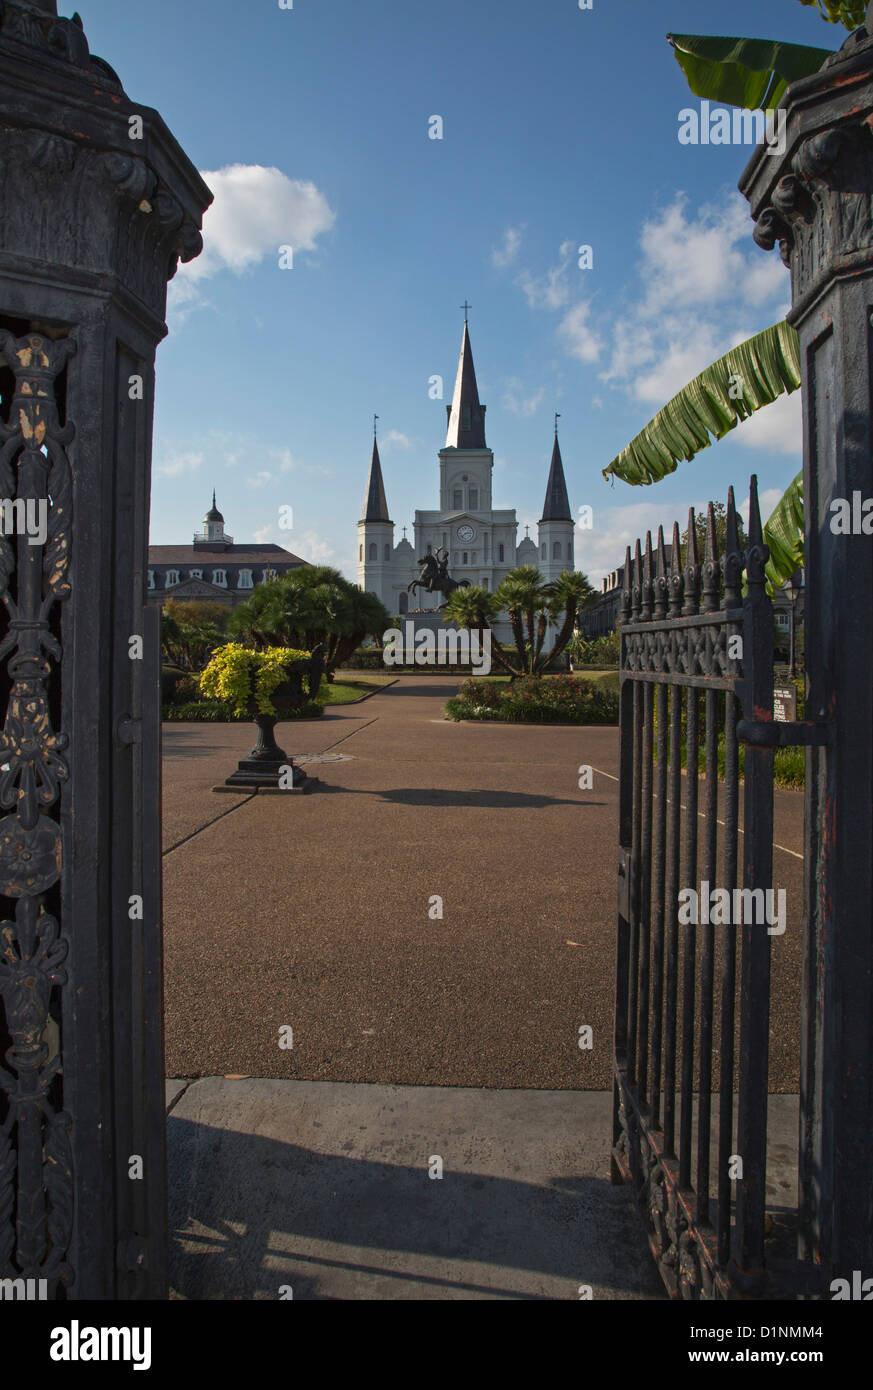 New Orleans, Louisiana - St. Louis Cathedral and Jackson Square. Stock Photo